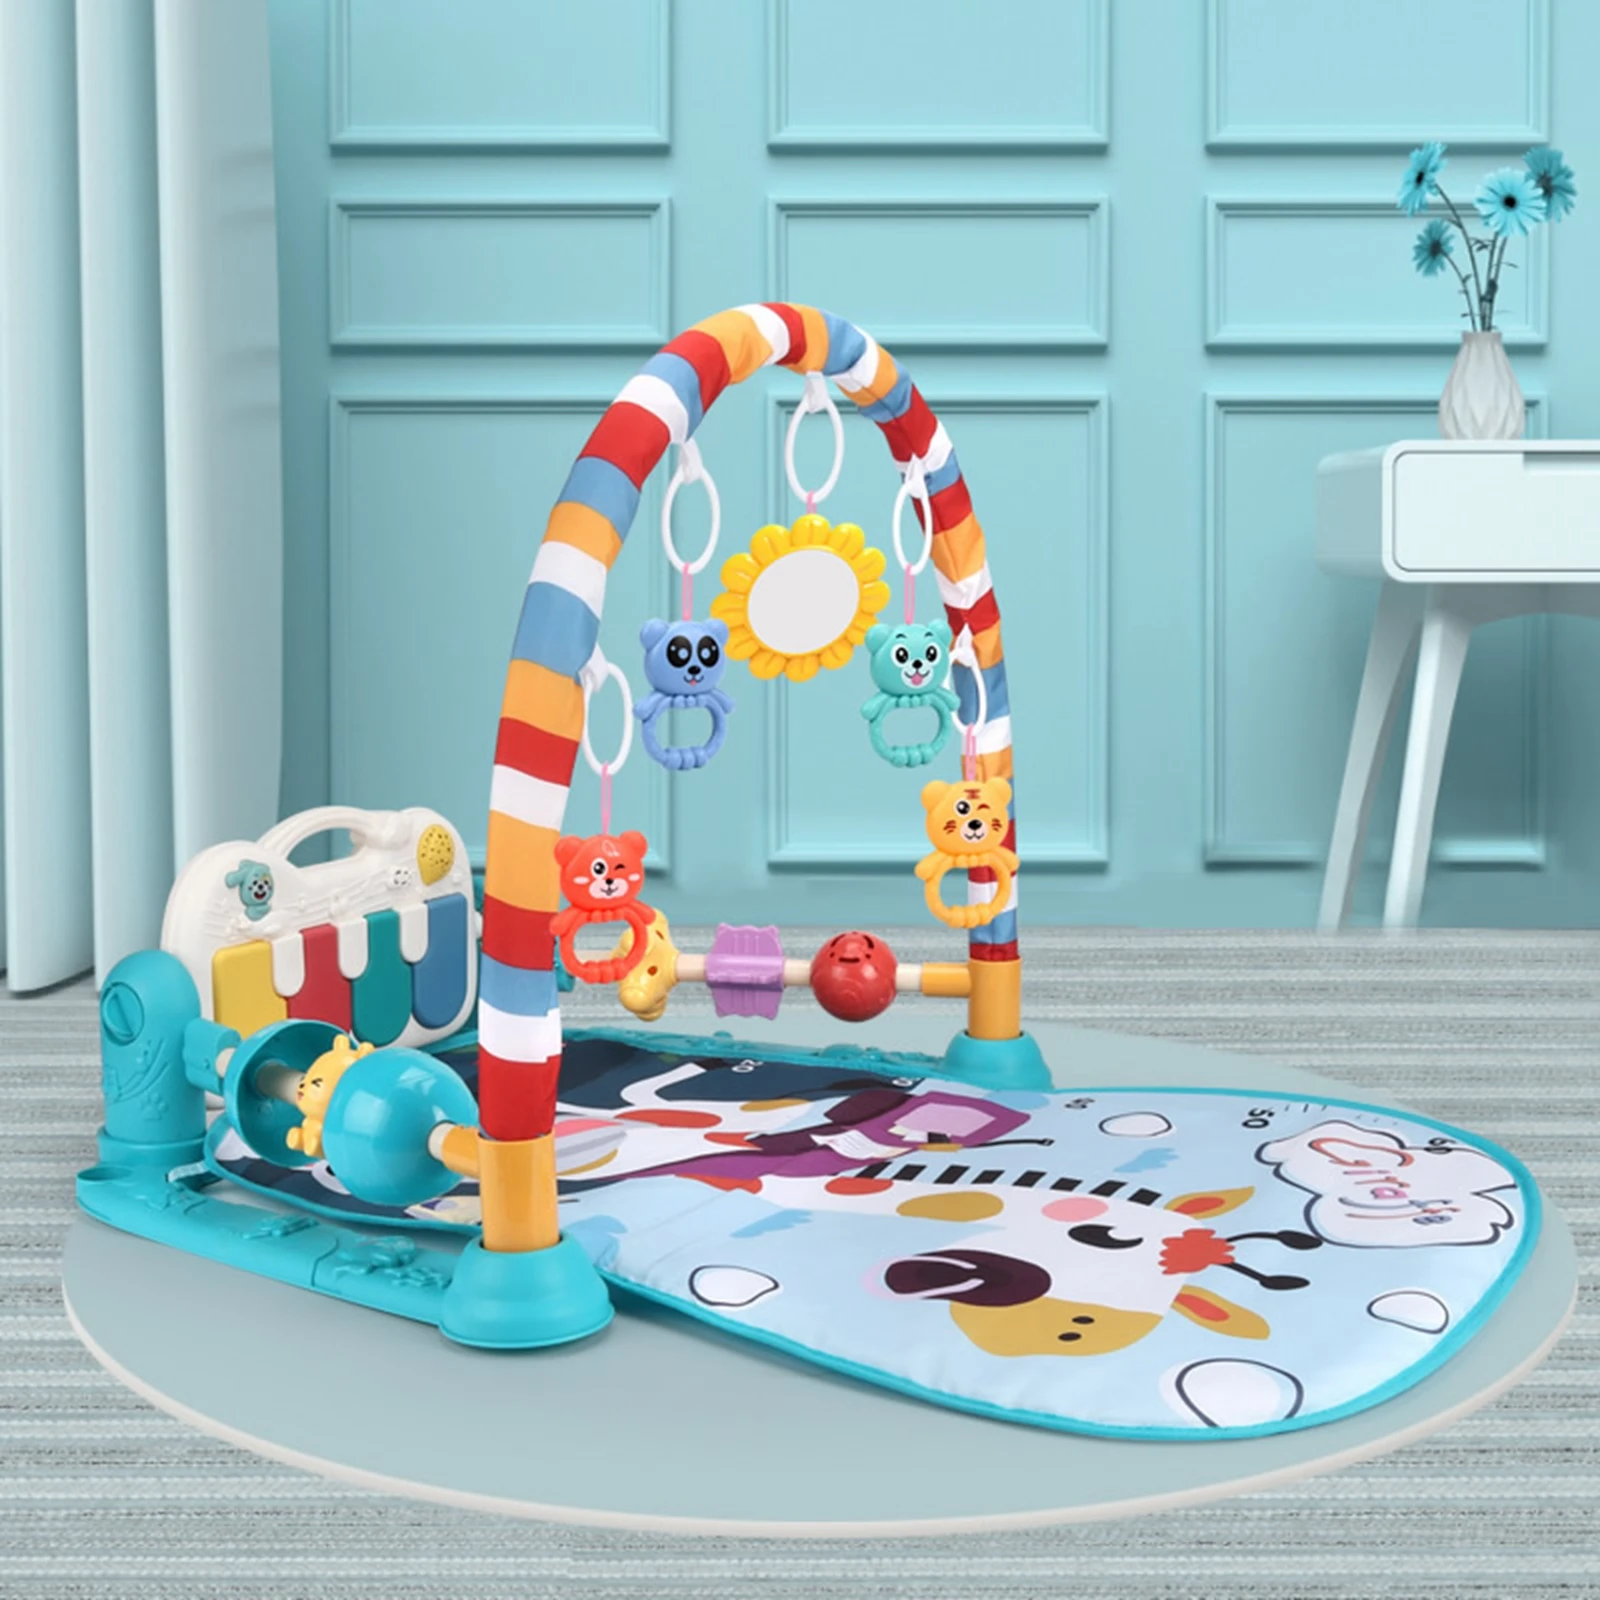 Baby Gym Play Mat Early Developmental Toys Music Play Mat Activity Gym for Babies Toddlers 6-12 Months 0-6 Months Xmas Gifts